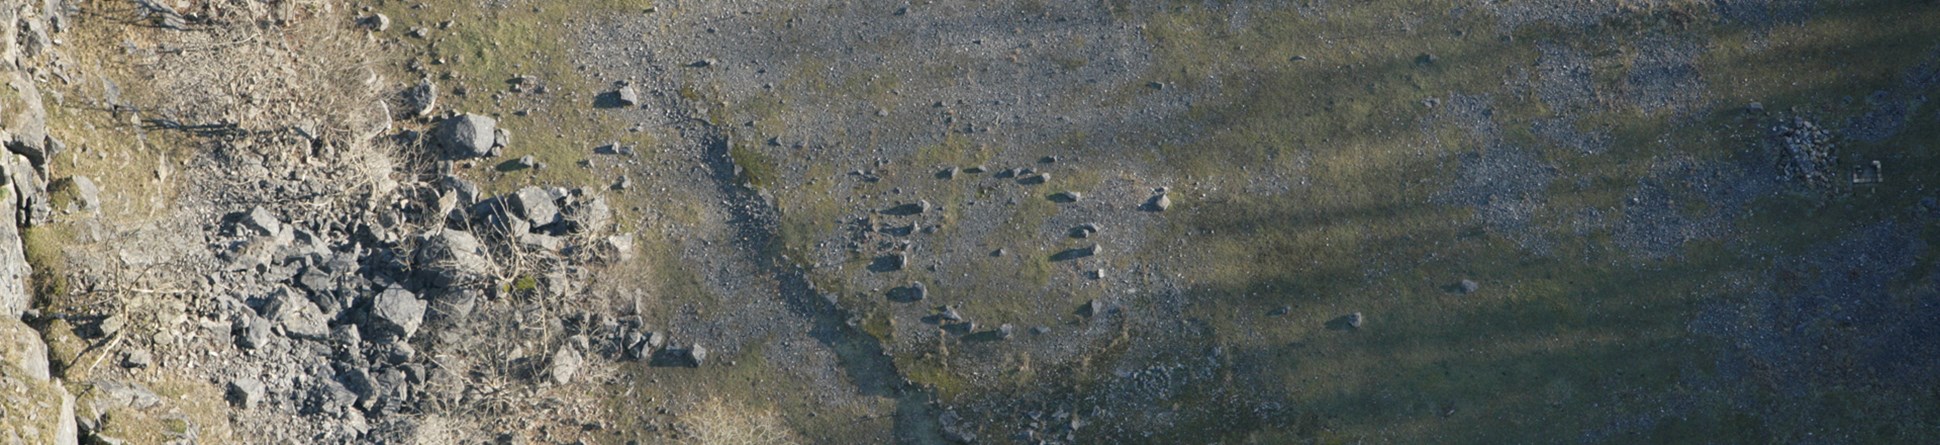 A recently created stone circle on the floor of the abandoned quarry of the East Buxton Limeworks in Millers dale, Derbyshire photographed on 26-NOV-2010. The works opened in 1880 and closed in 1944 (NMR 28105\30).